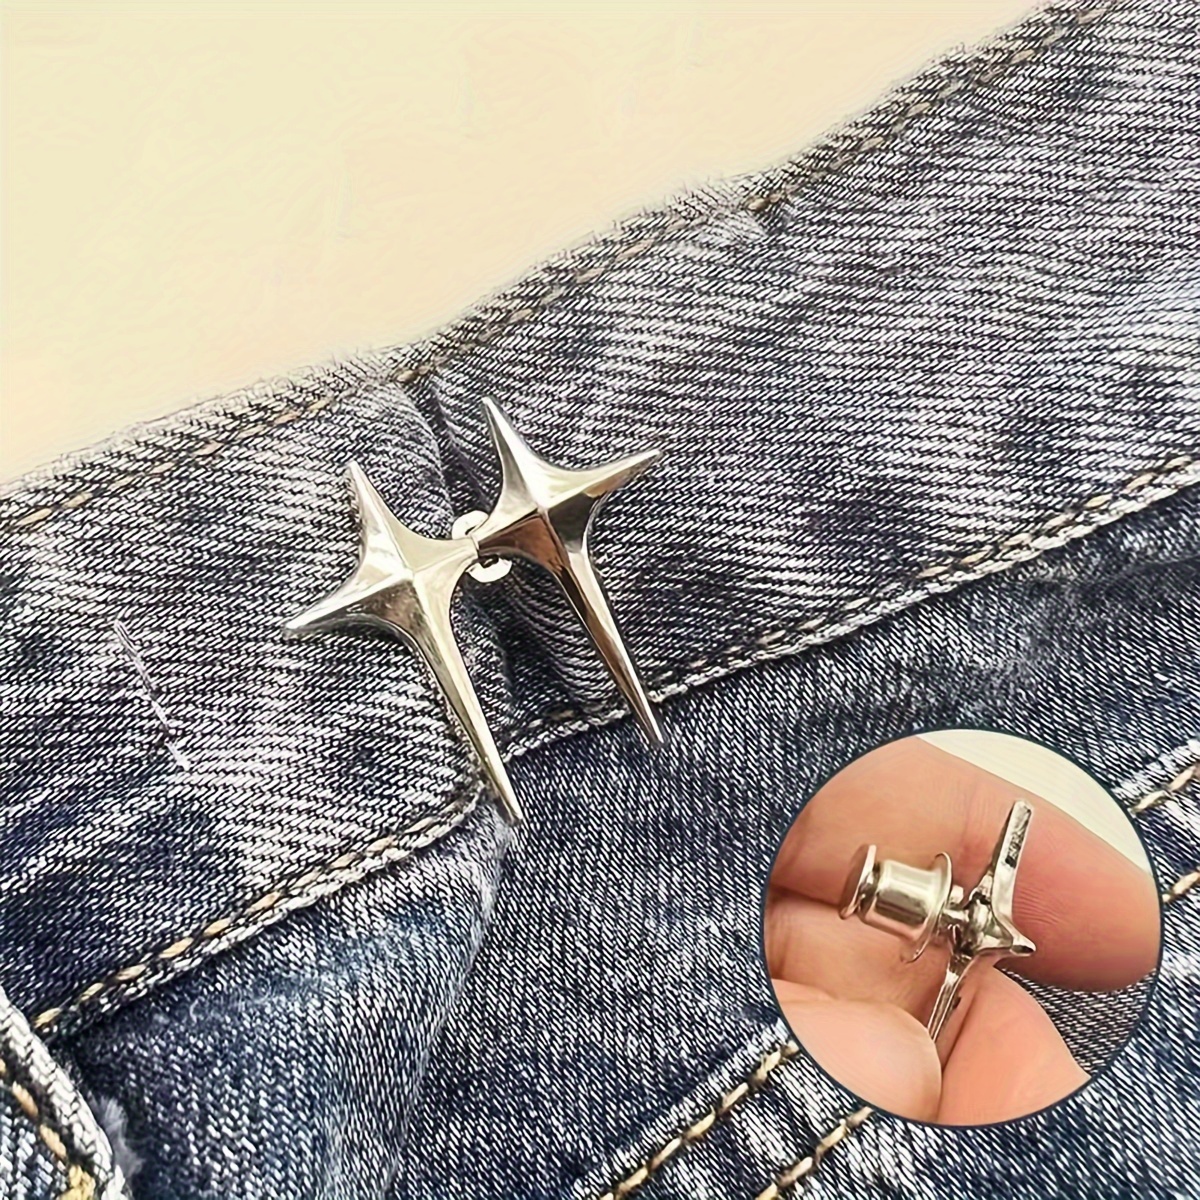 2PCs Snap Fastener Metal Buttons for Clothing Jeans Perfect Fit Adjust  Button self Increase Reduce Waist Free Nail Sew Botones